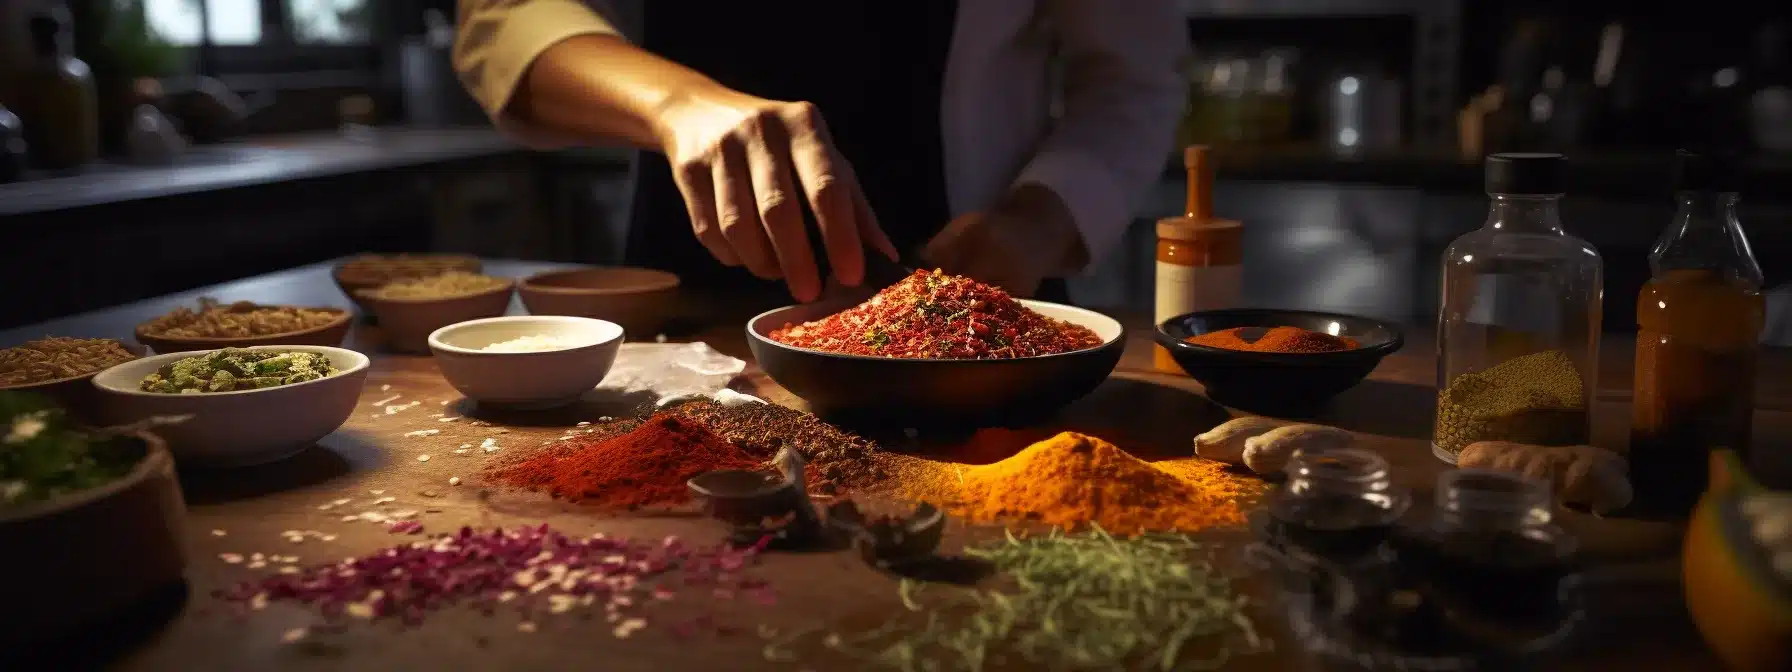 A Chef Sprinkling Exotic Spices Onto A Dish.